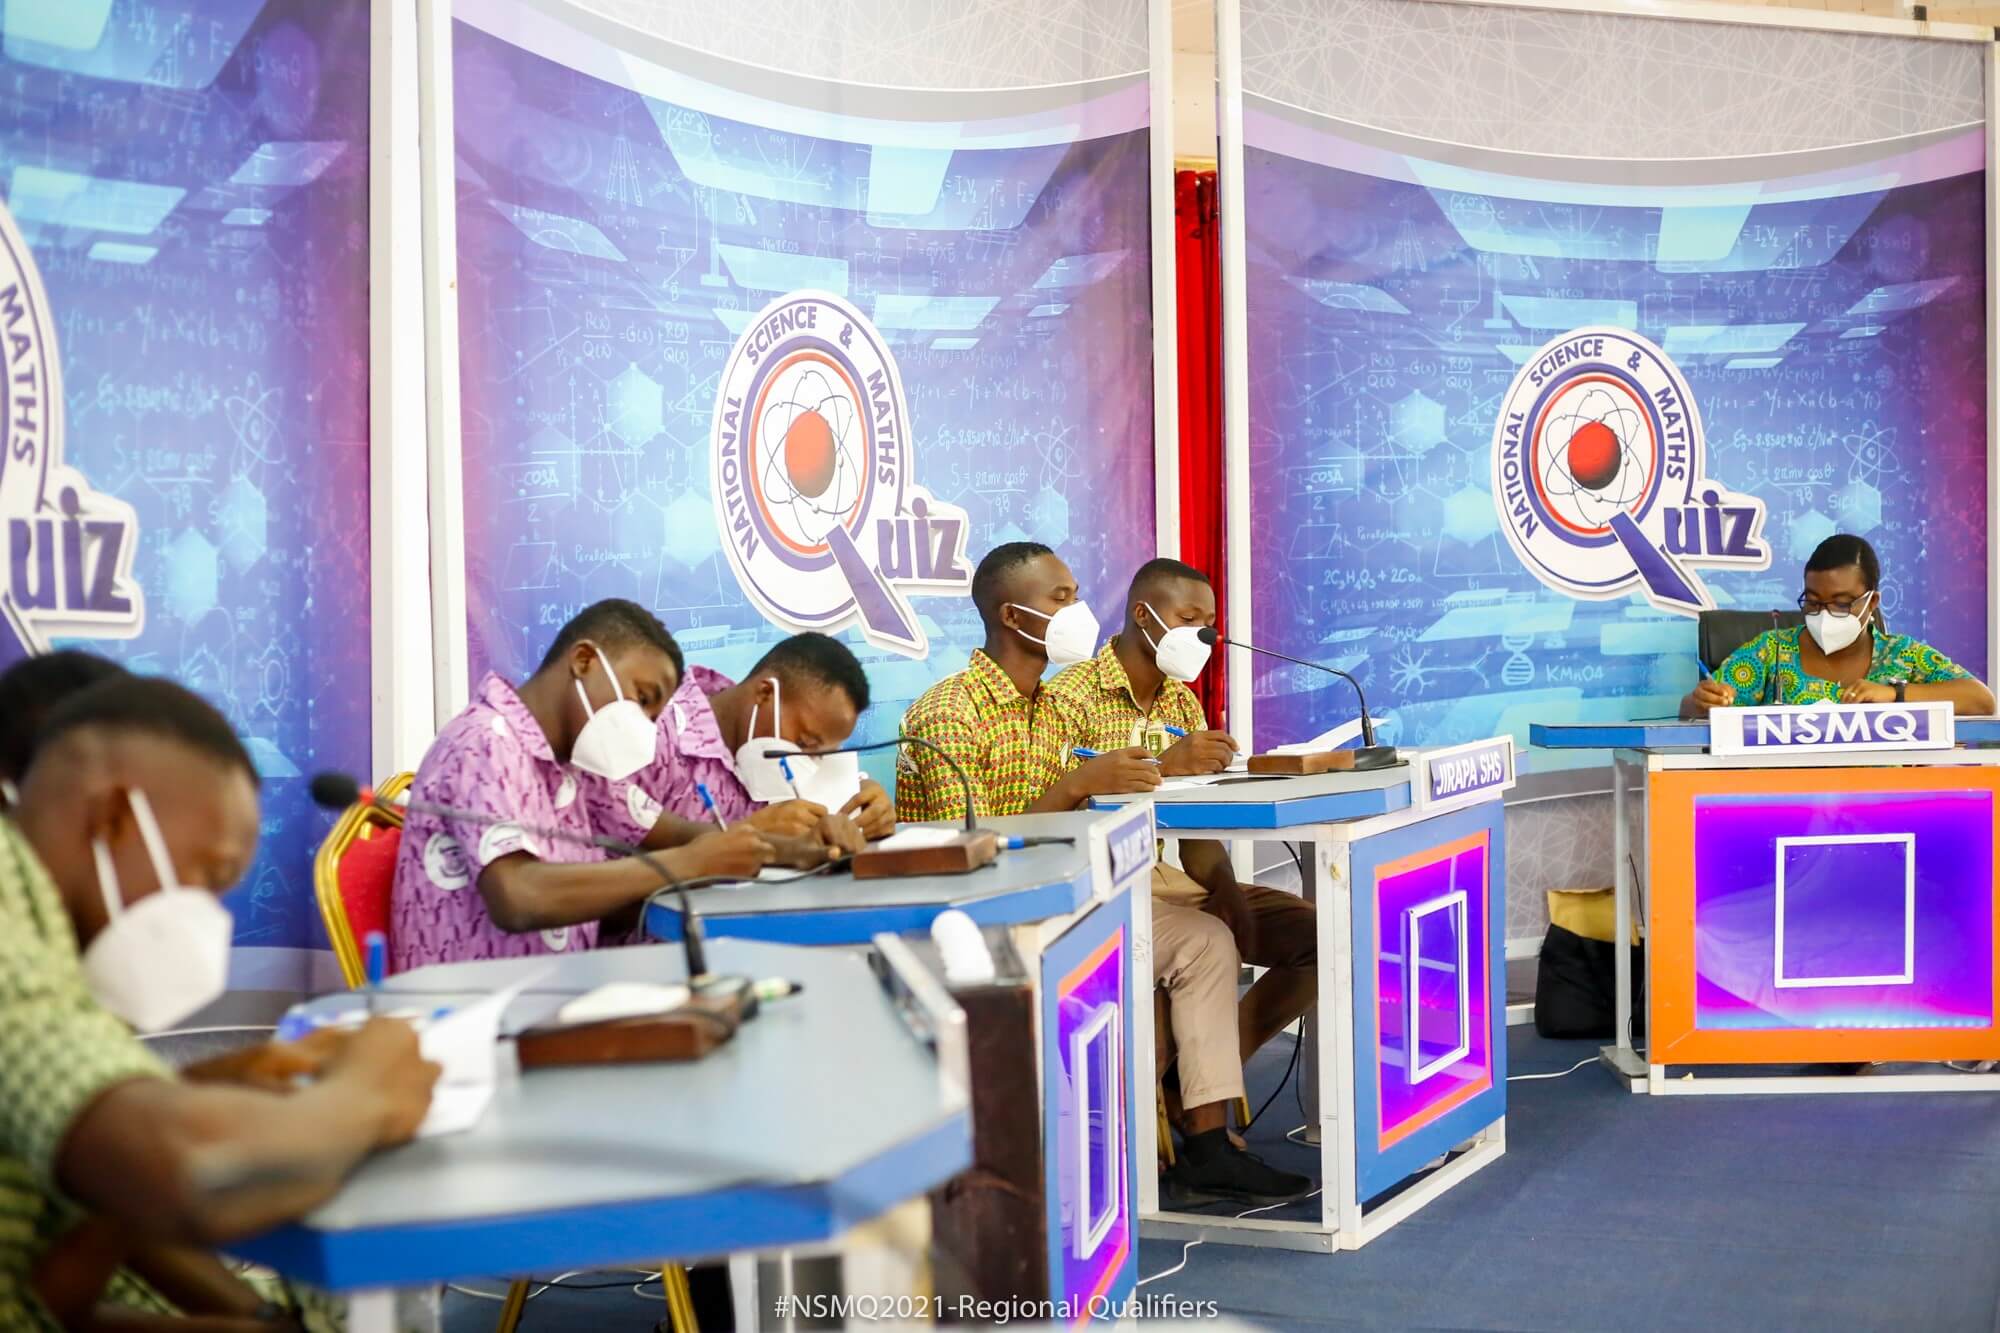 Check out SHSs to compete for 2021 NSMQ championship title